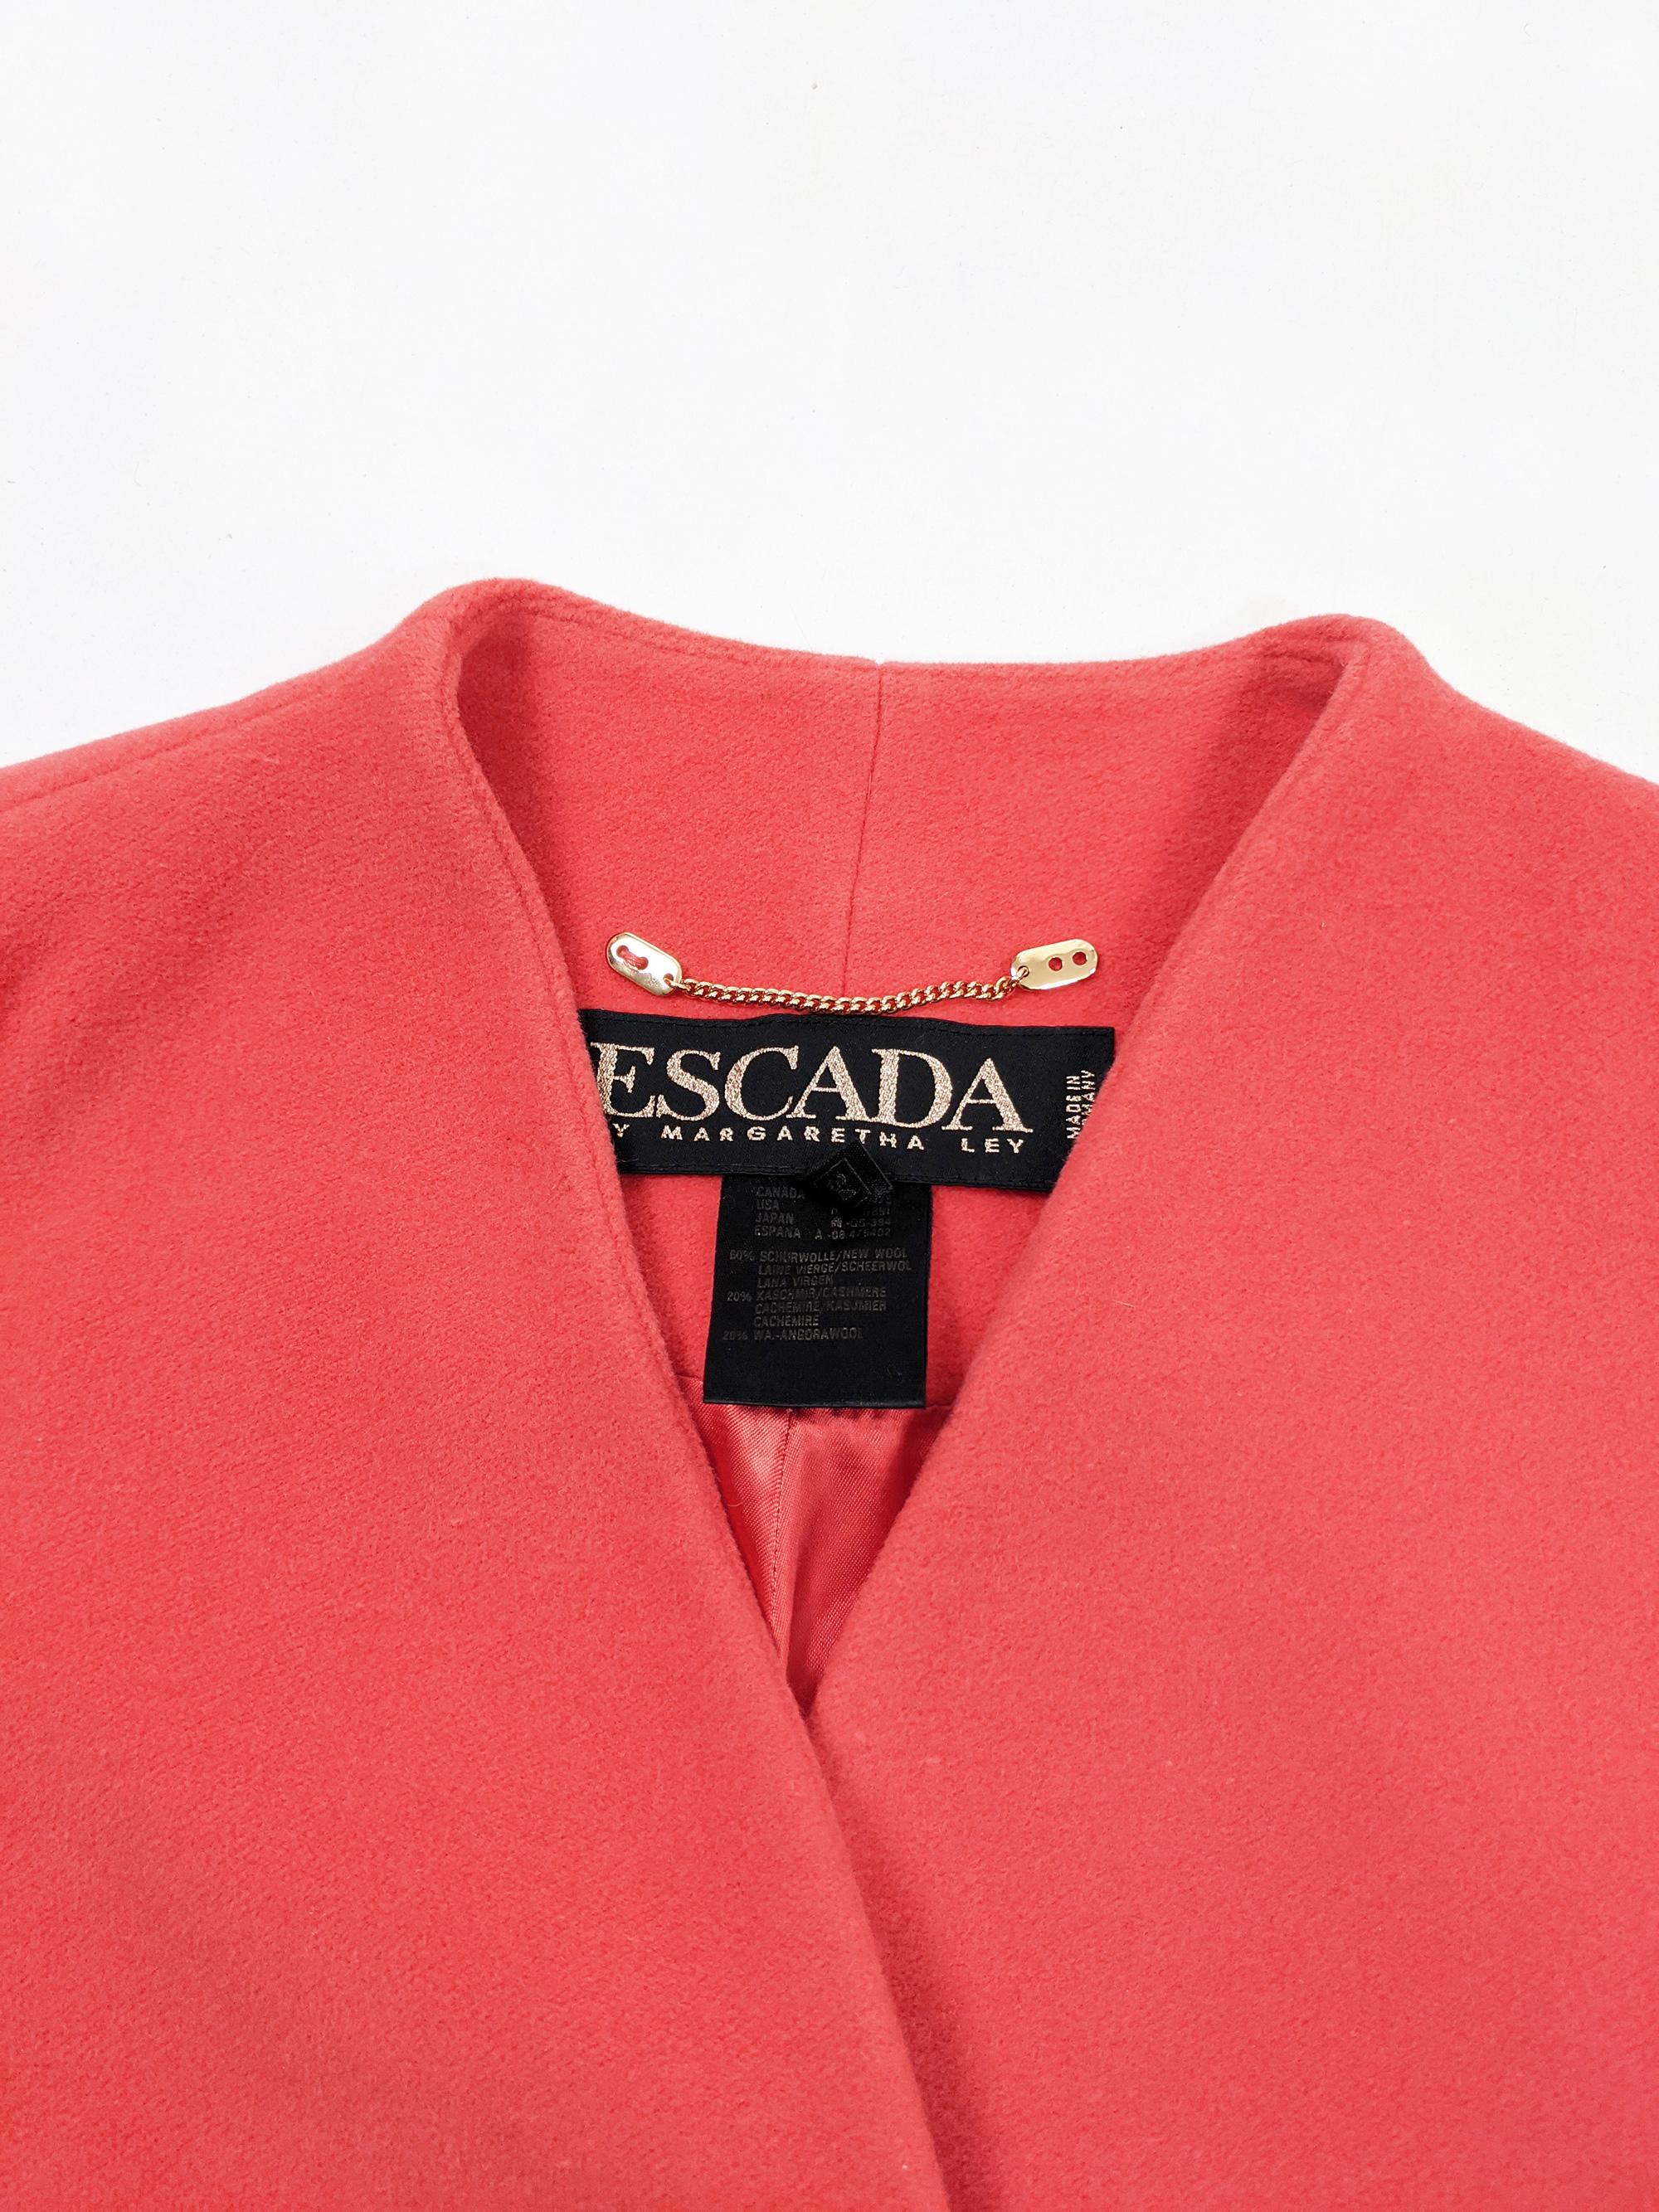 Escada Vintage Coral Cashmere Wool & Angora Swing Trapeze Coat, 1980s For Sale 2